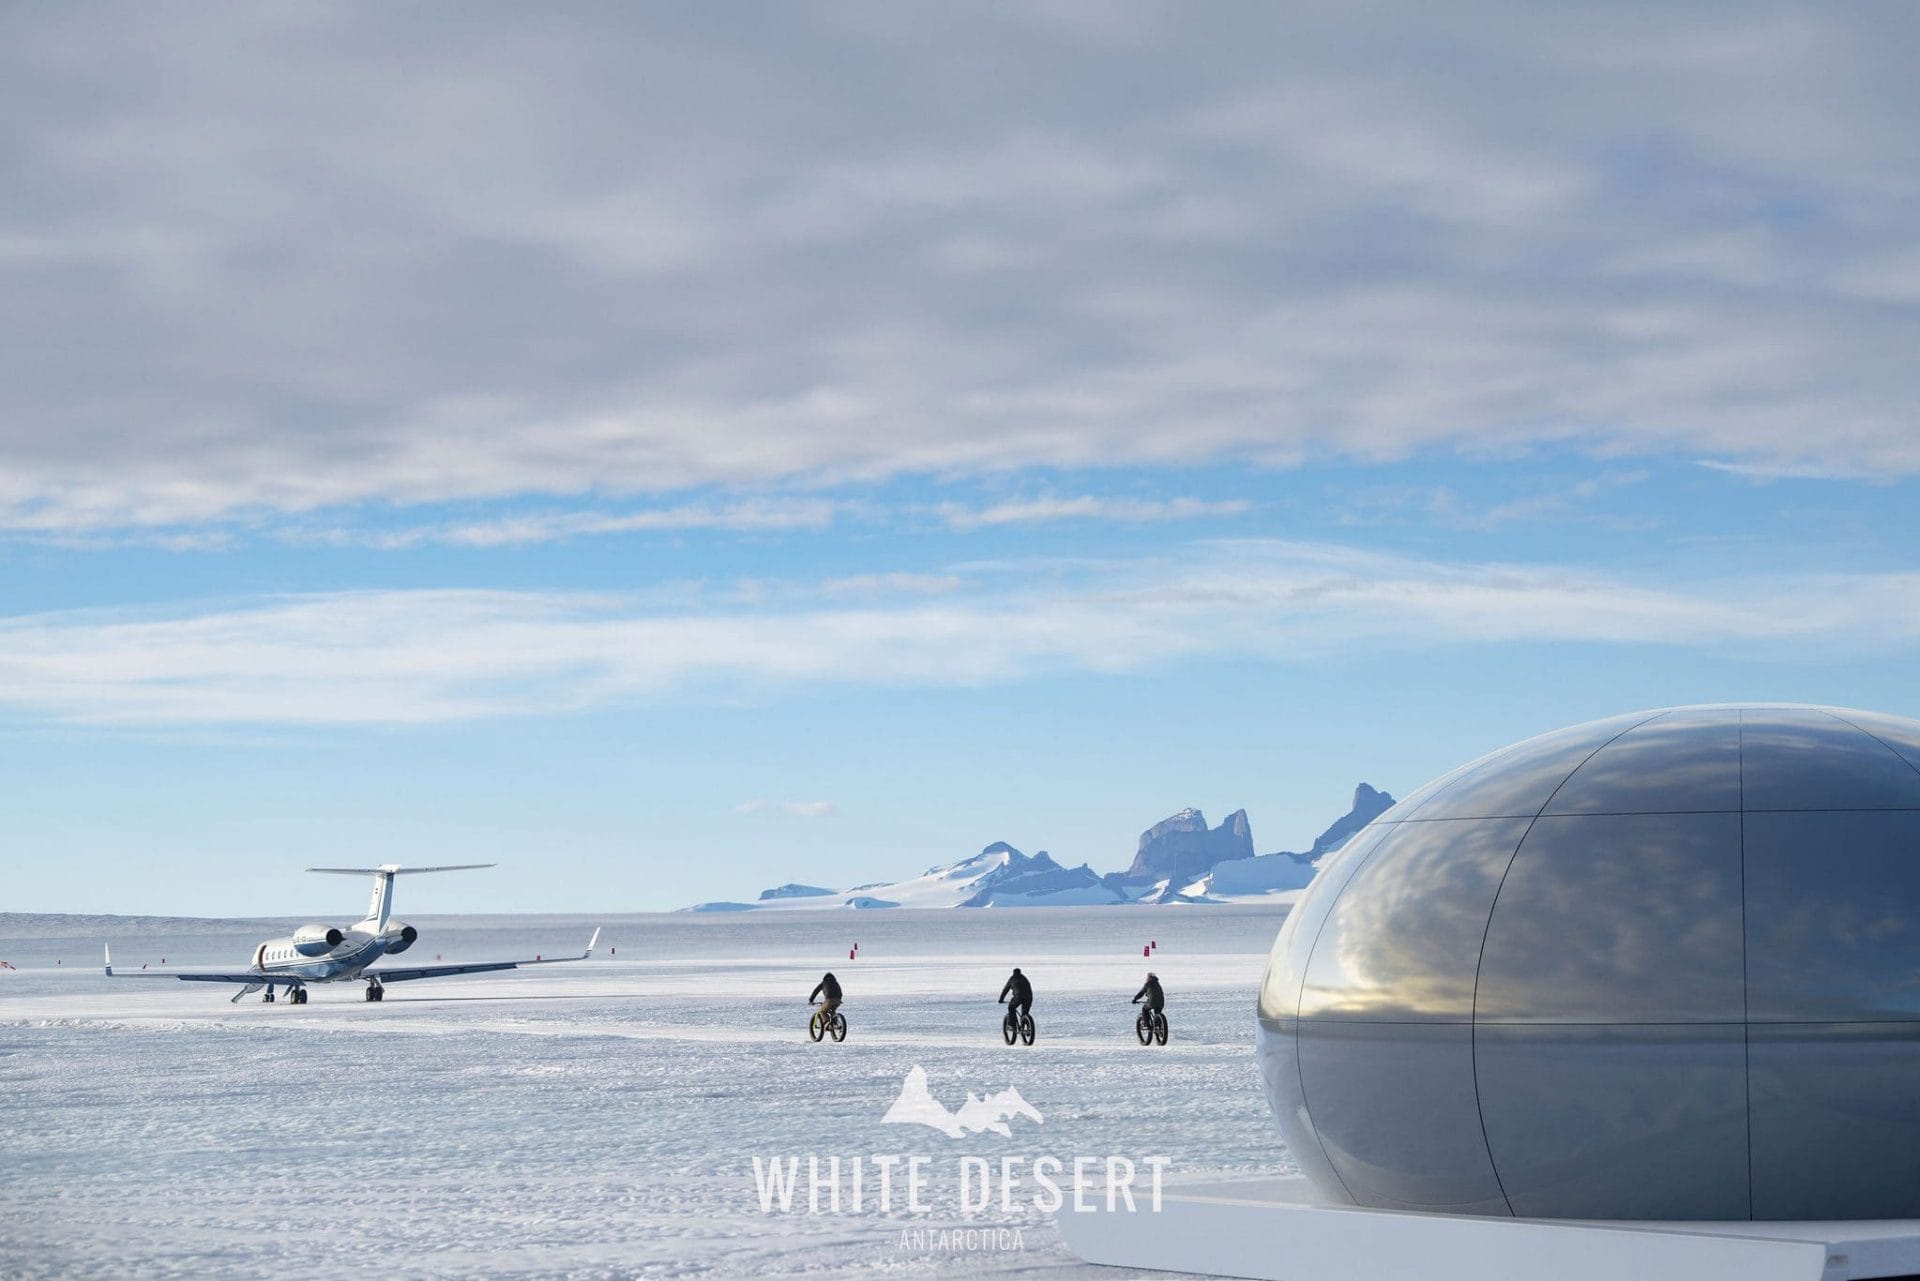 Aircraft landing strip in Antarctica and people riding bicycles in the snow.